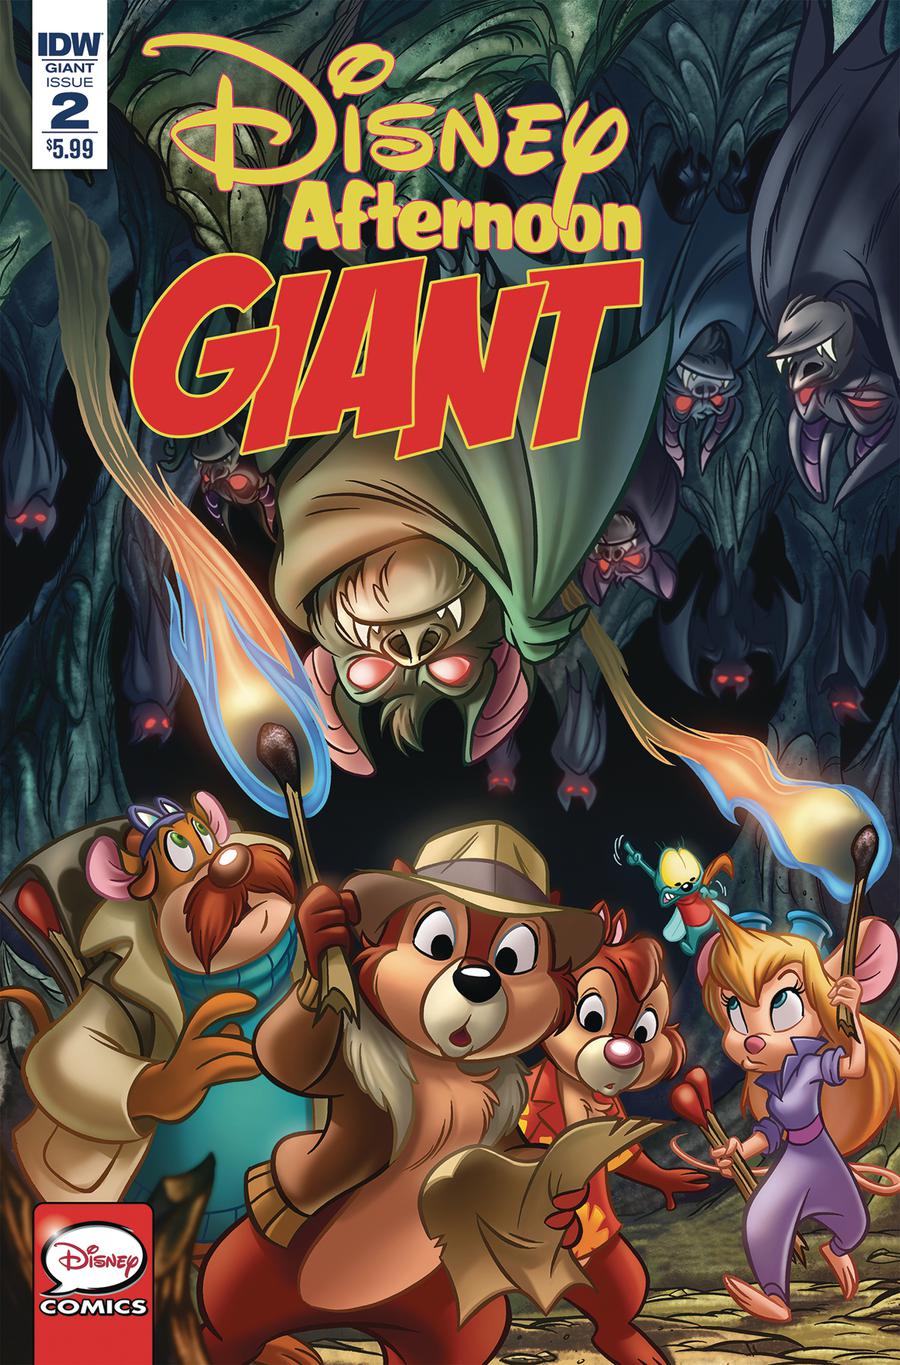 Disney Afternoon Giant #2